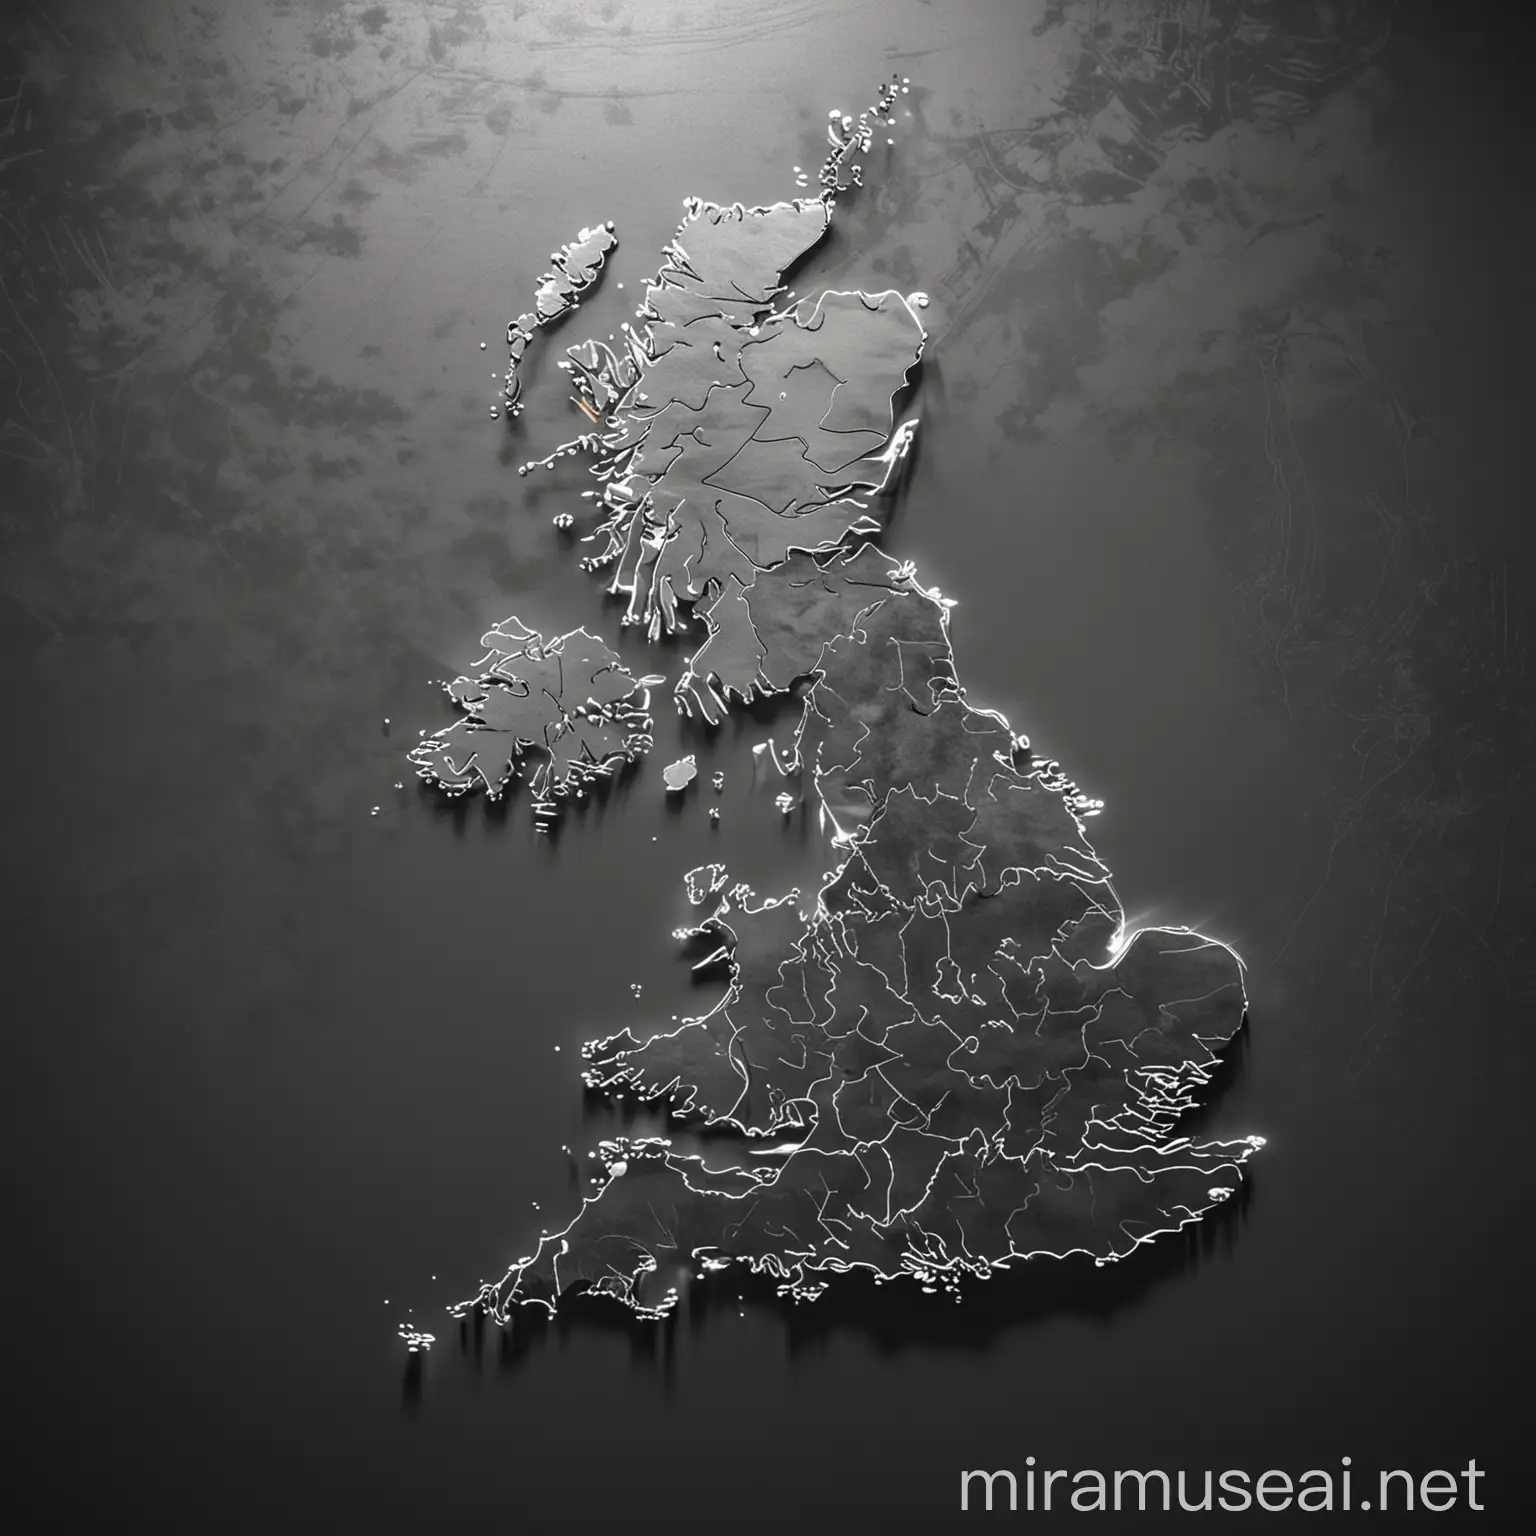 blacked out background, 2d outline of the uk map in silver